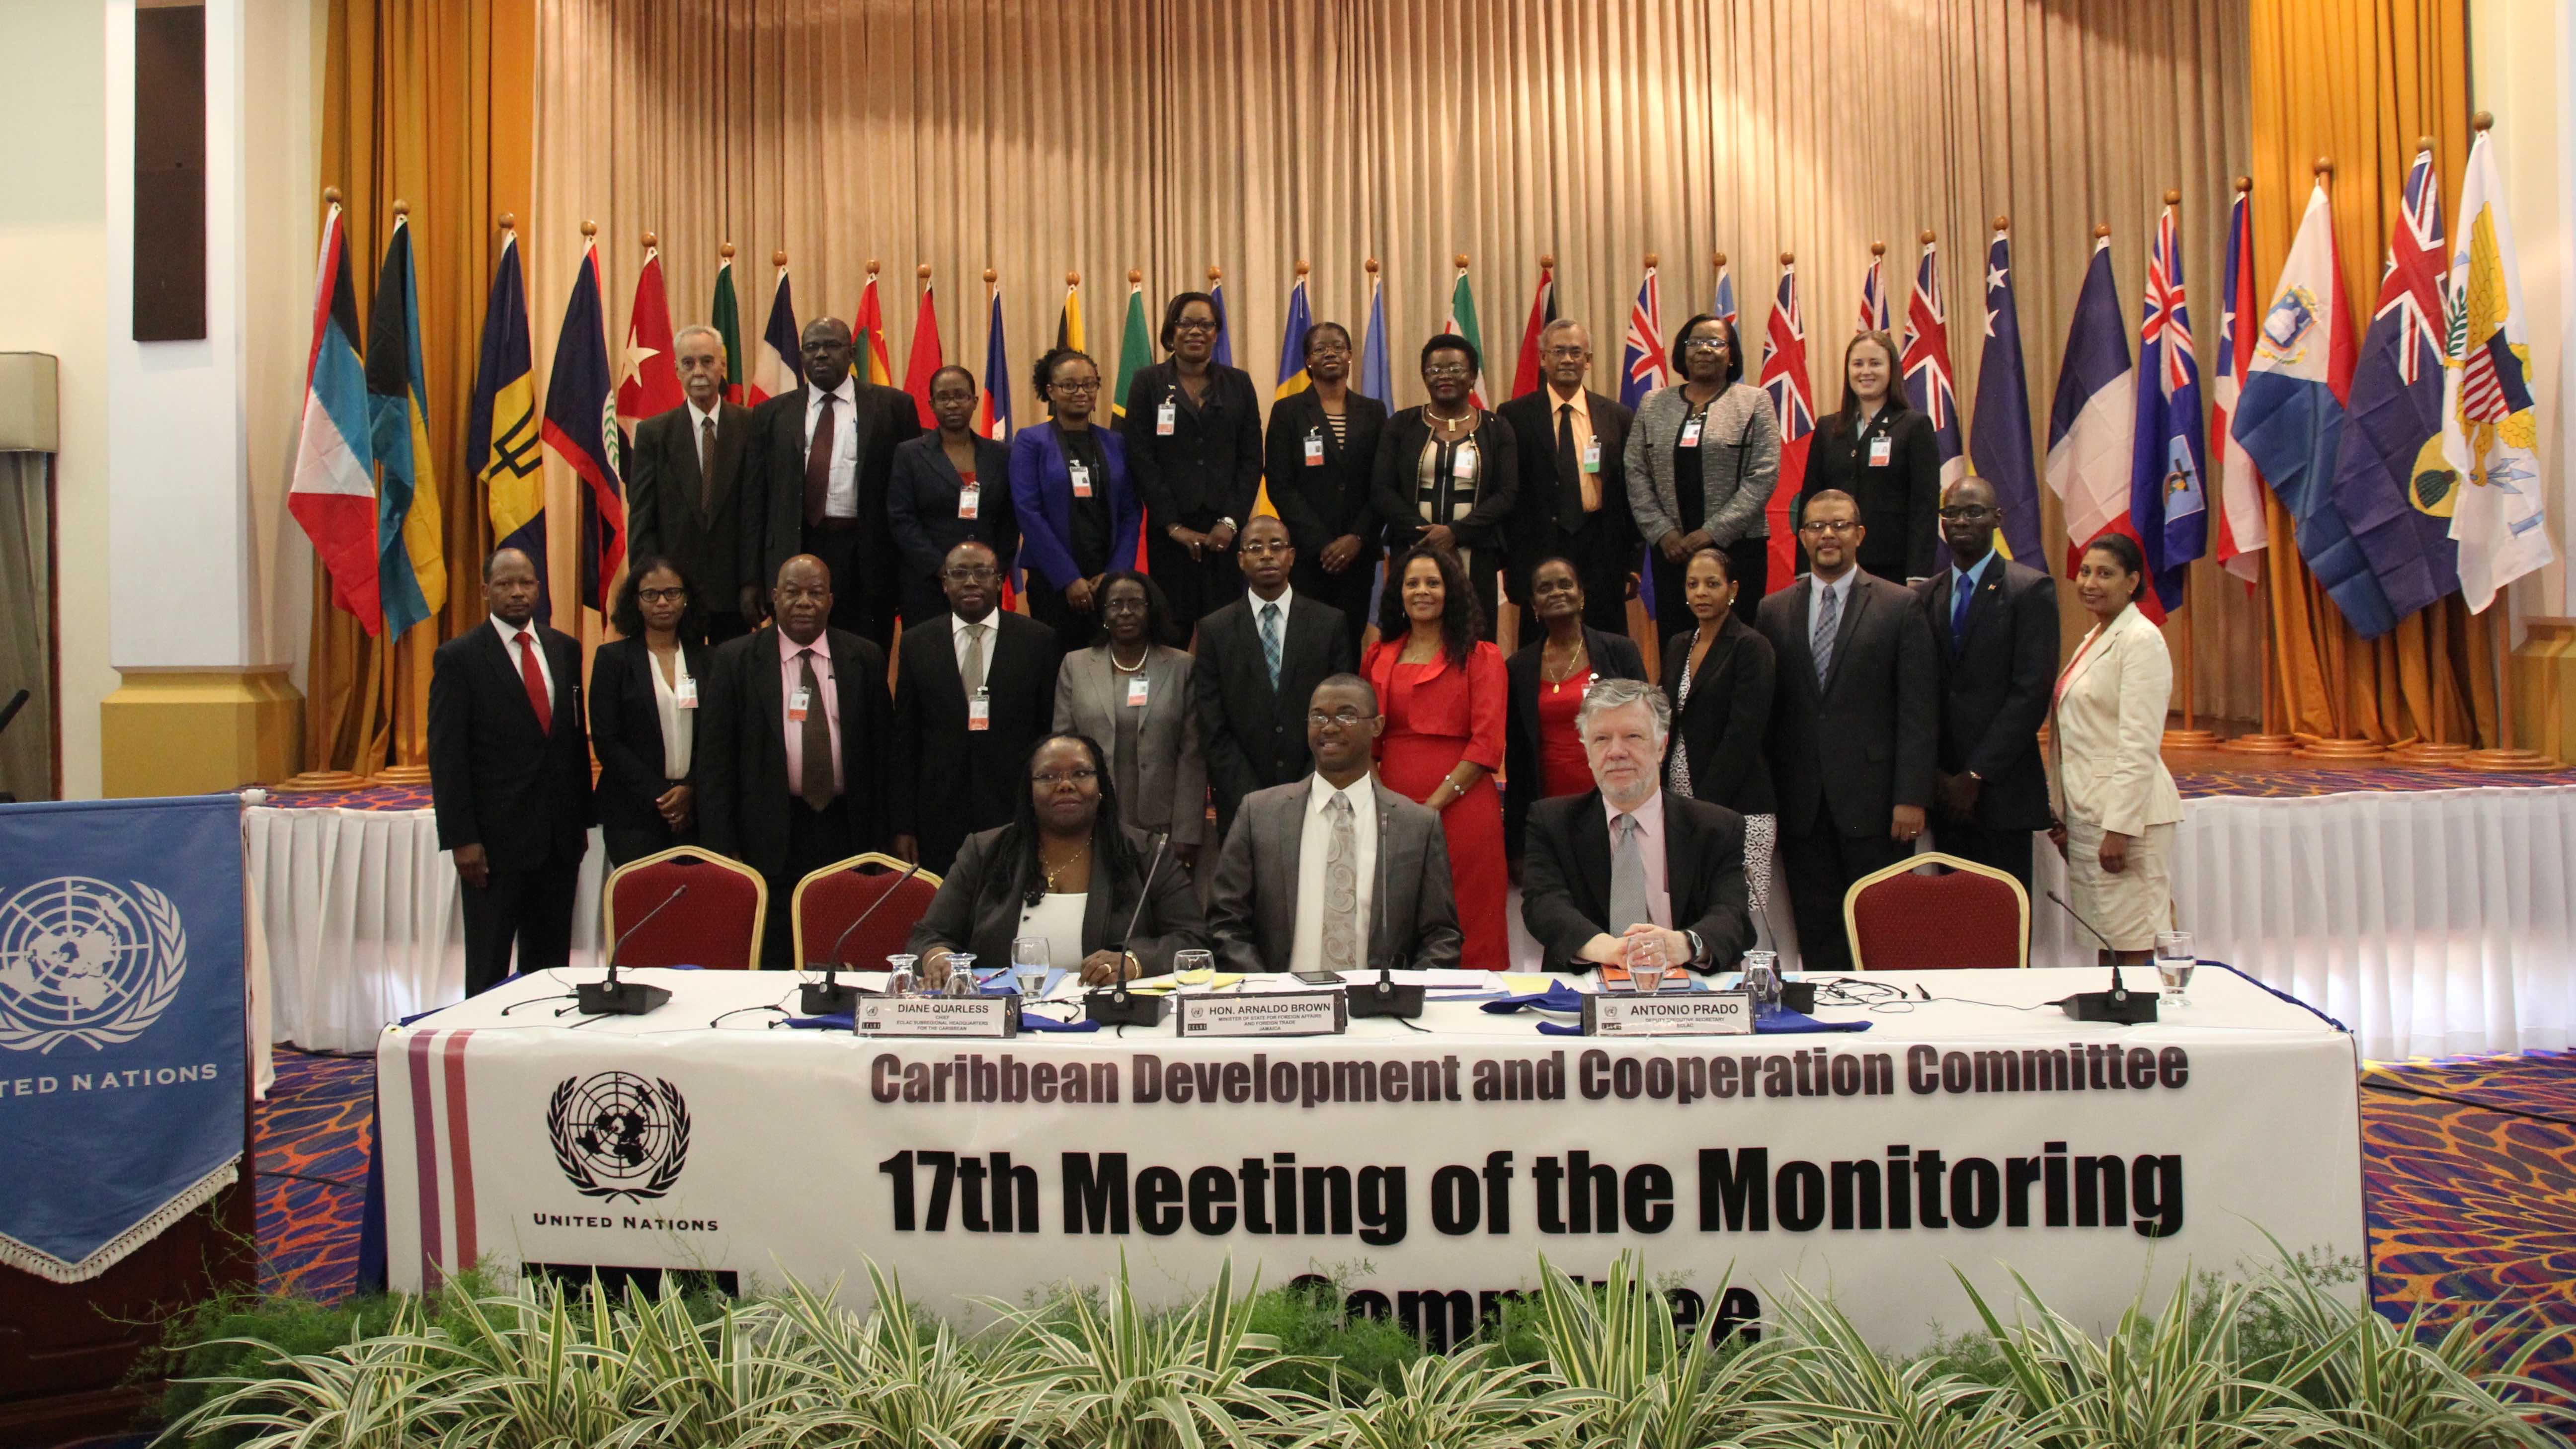 Attendees of the 17th Meeting of the Monitoring Committee of the CDCC